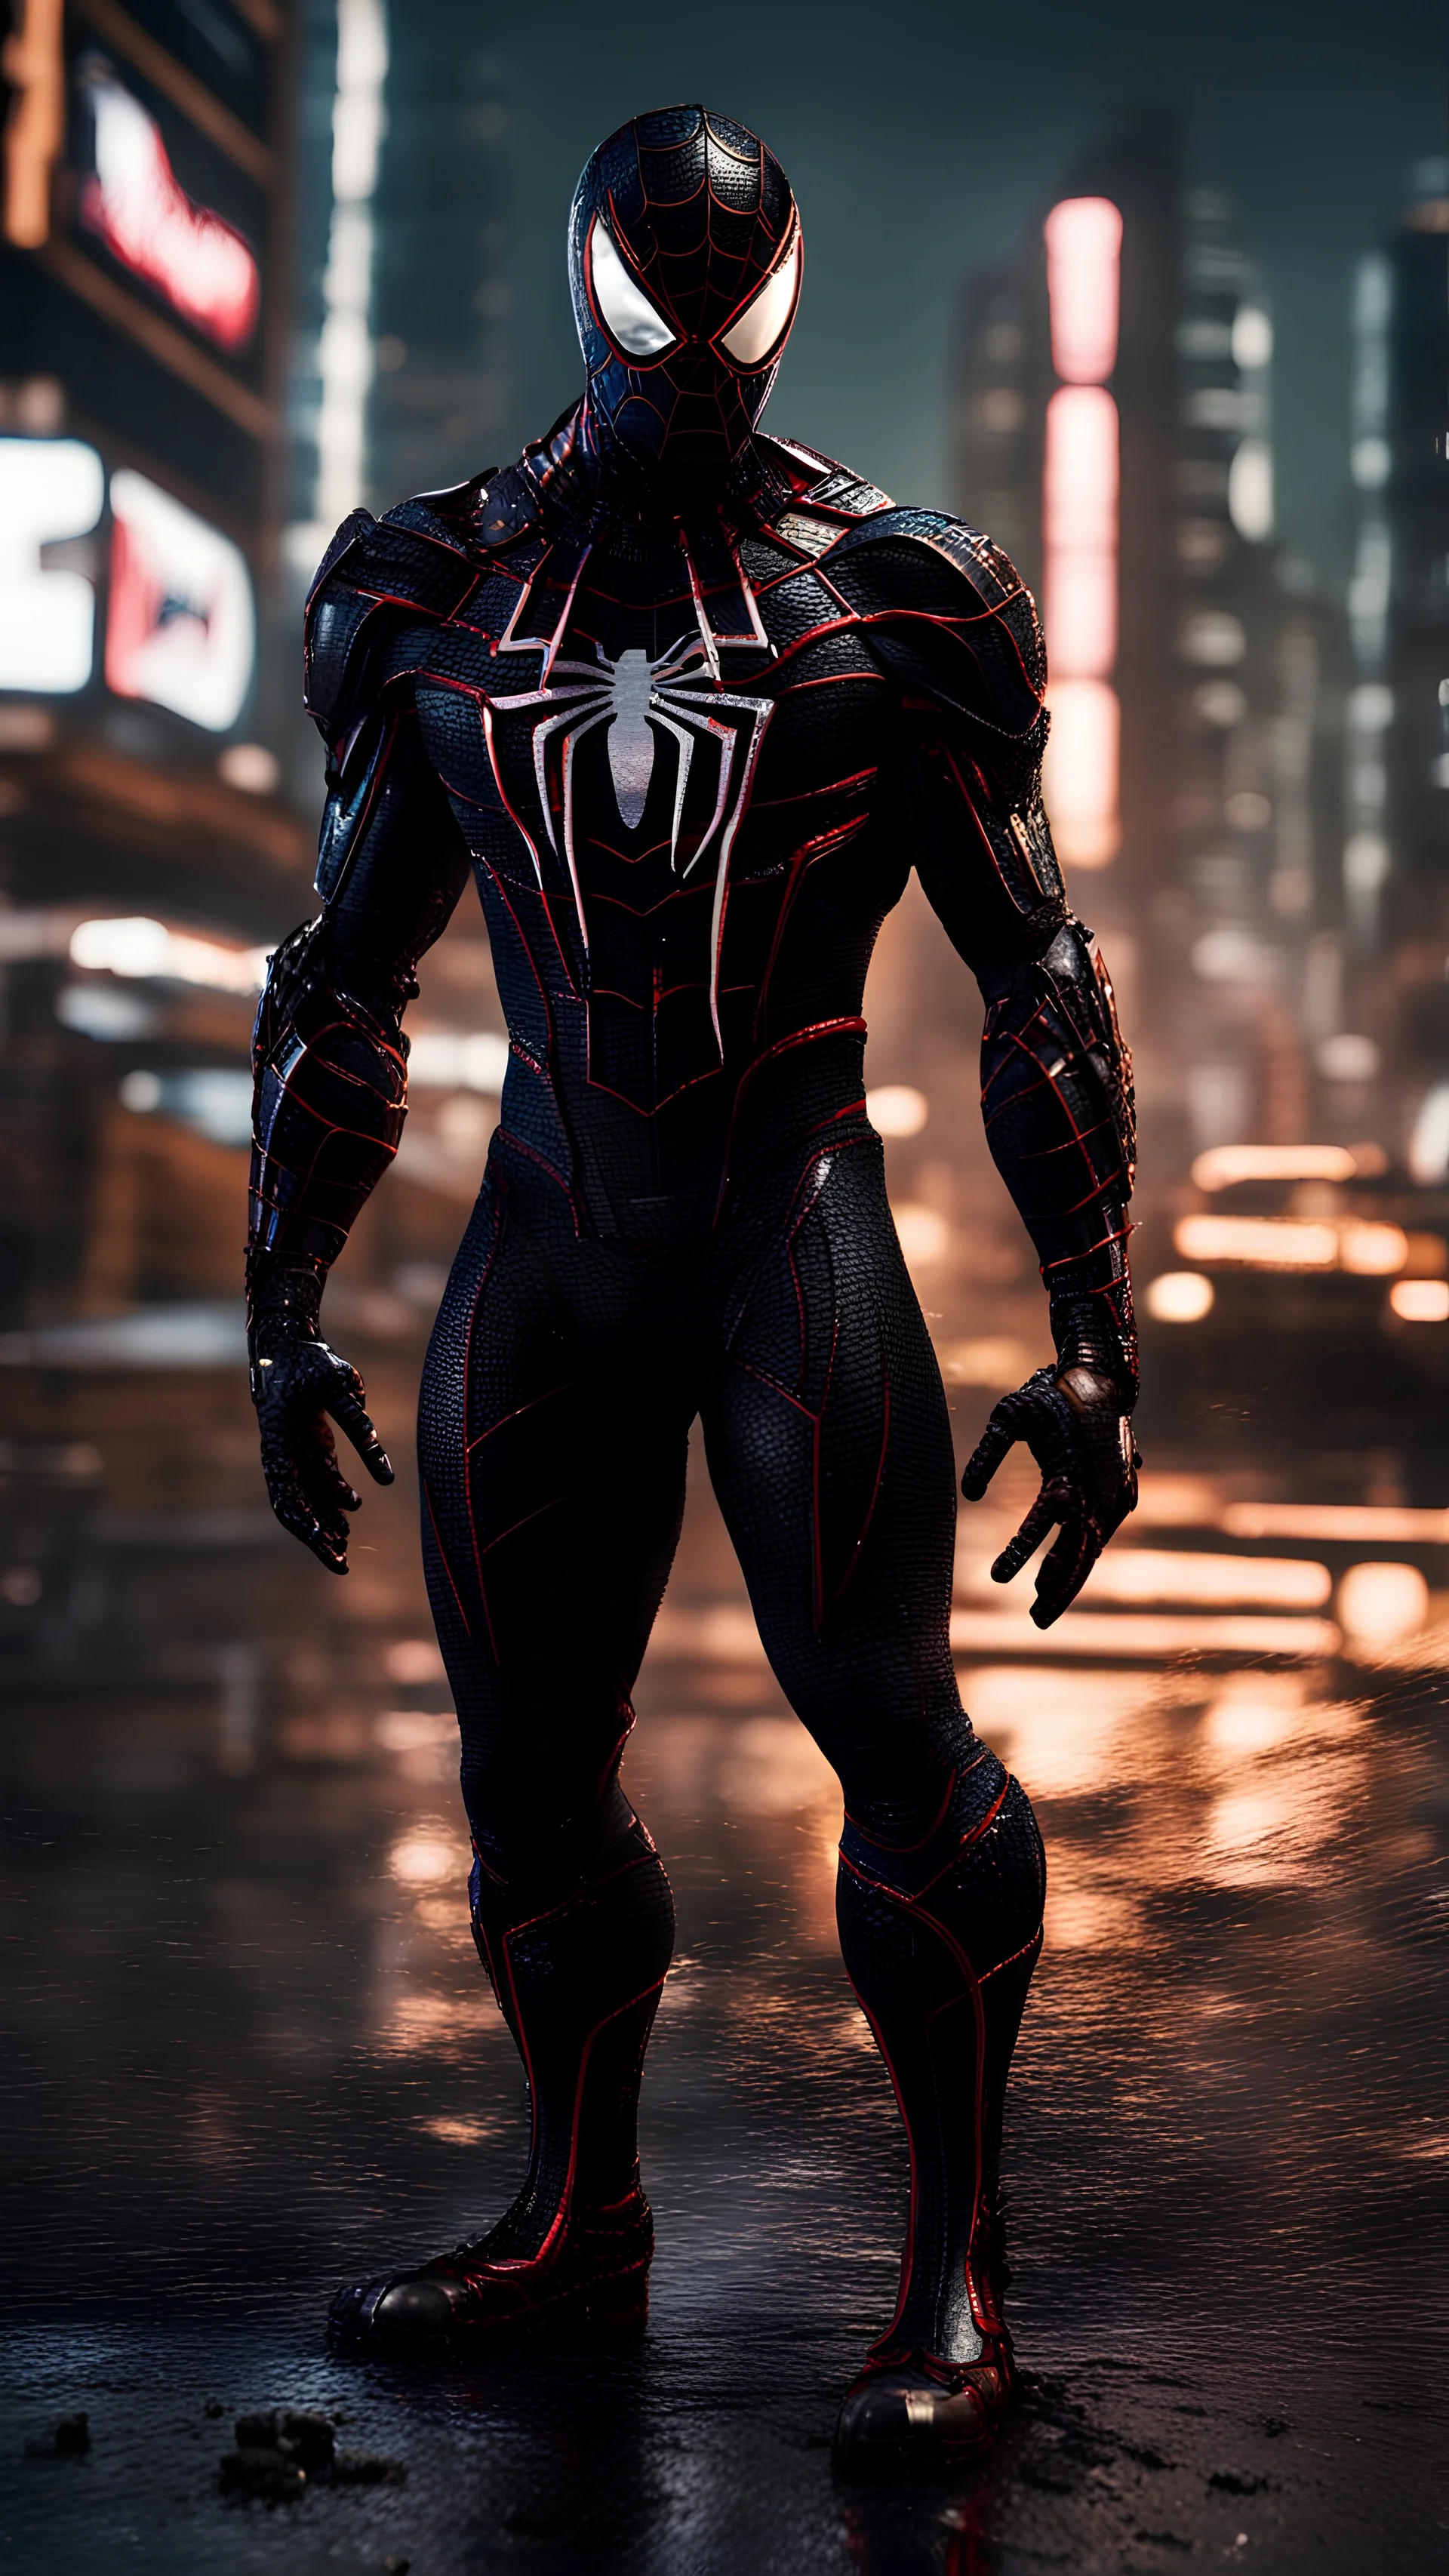 Spiderman wearing venom armor, face visible, sharp face focus, ready for batt, destroyed city in the background, deep perspective. bokeh, rim lights, light leaks, neon ambiance, abstract black oil, gear mecha, detailed acrylic, grunge, intricate complexity, rendered in unreal engine, photorealistic